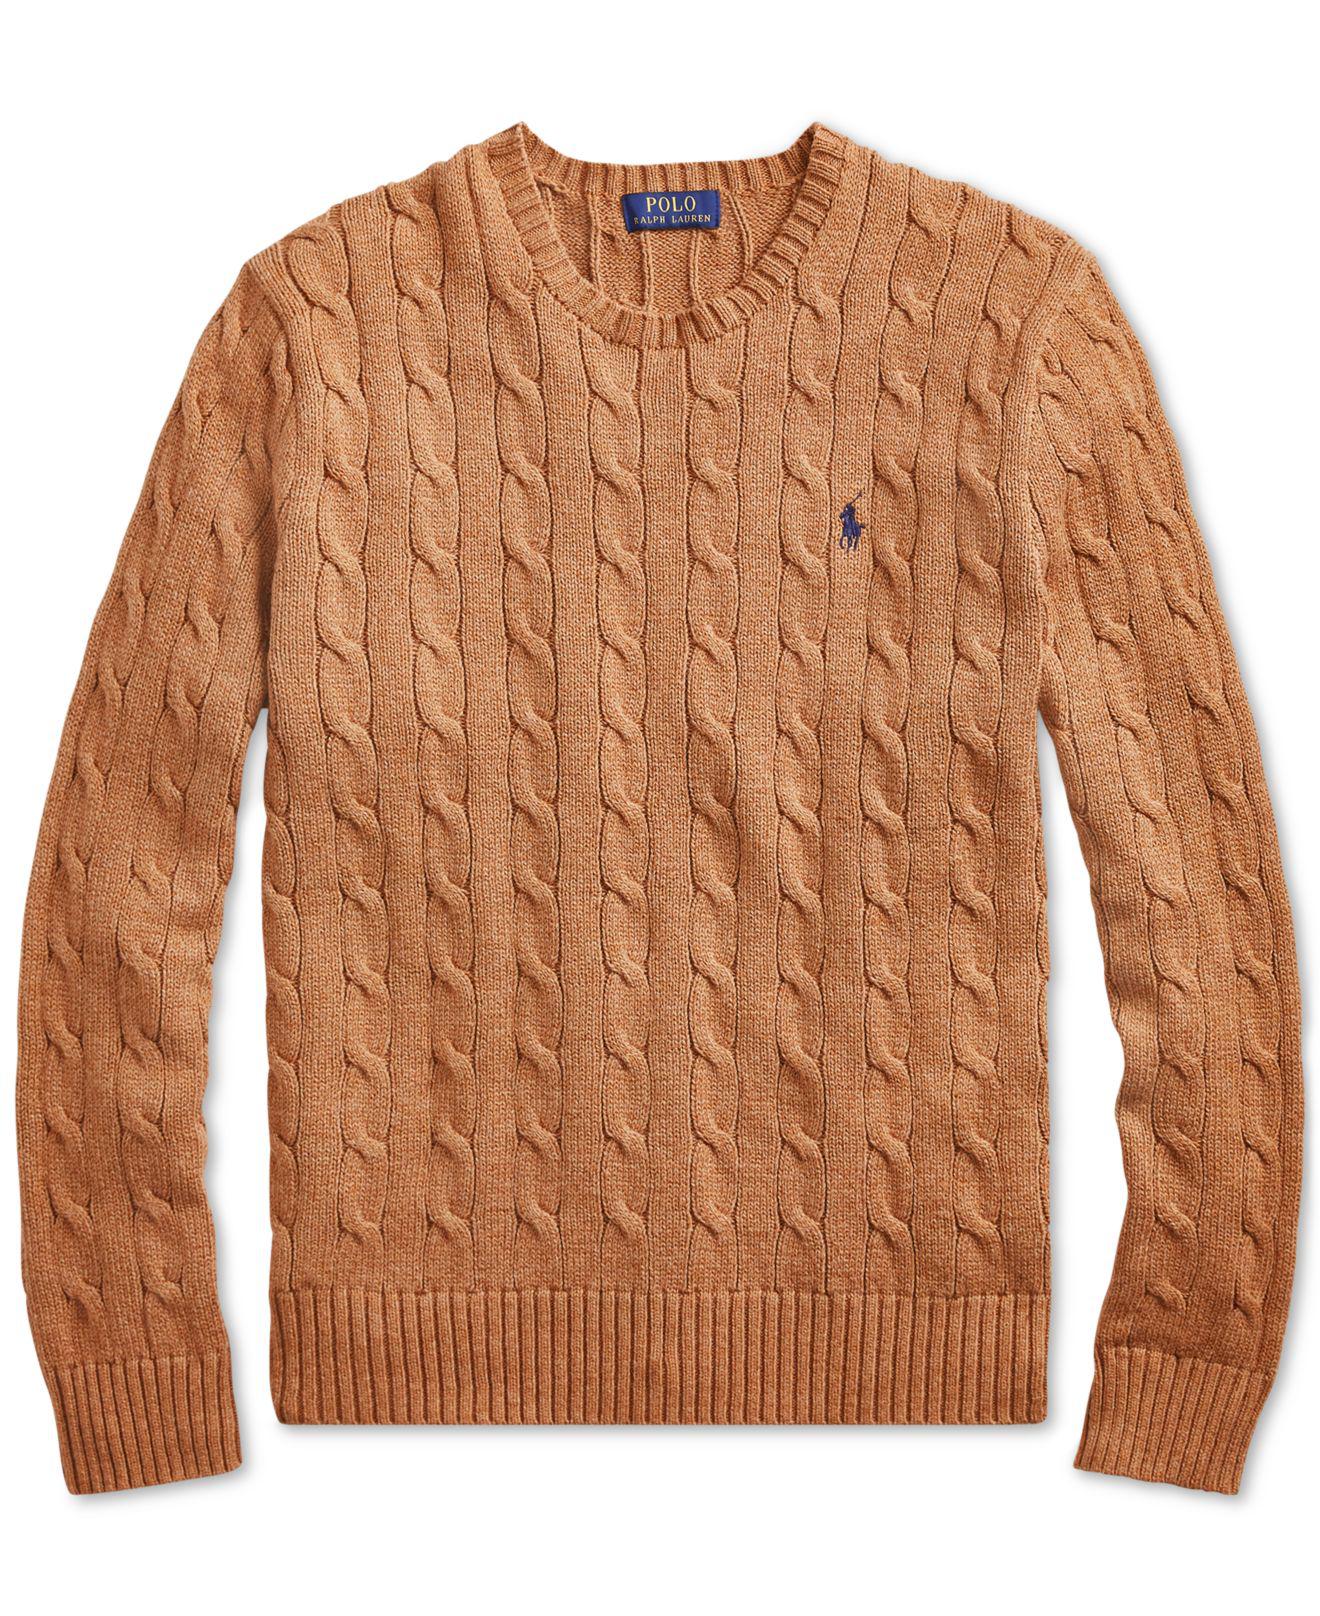 Polo Ralph Lauren Cable-knit Cotton Sweater in rl Brown (Brown) for Men ...